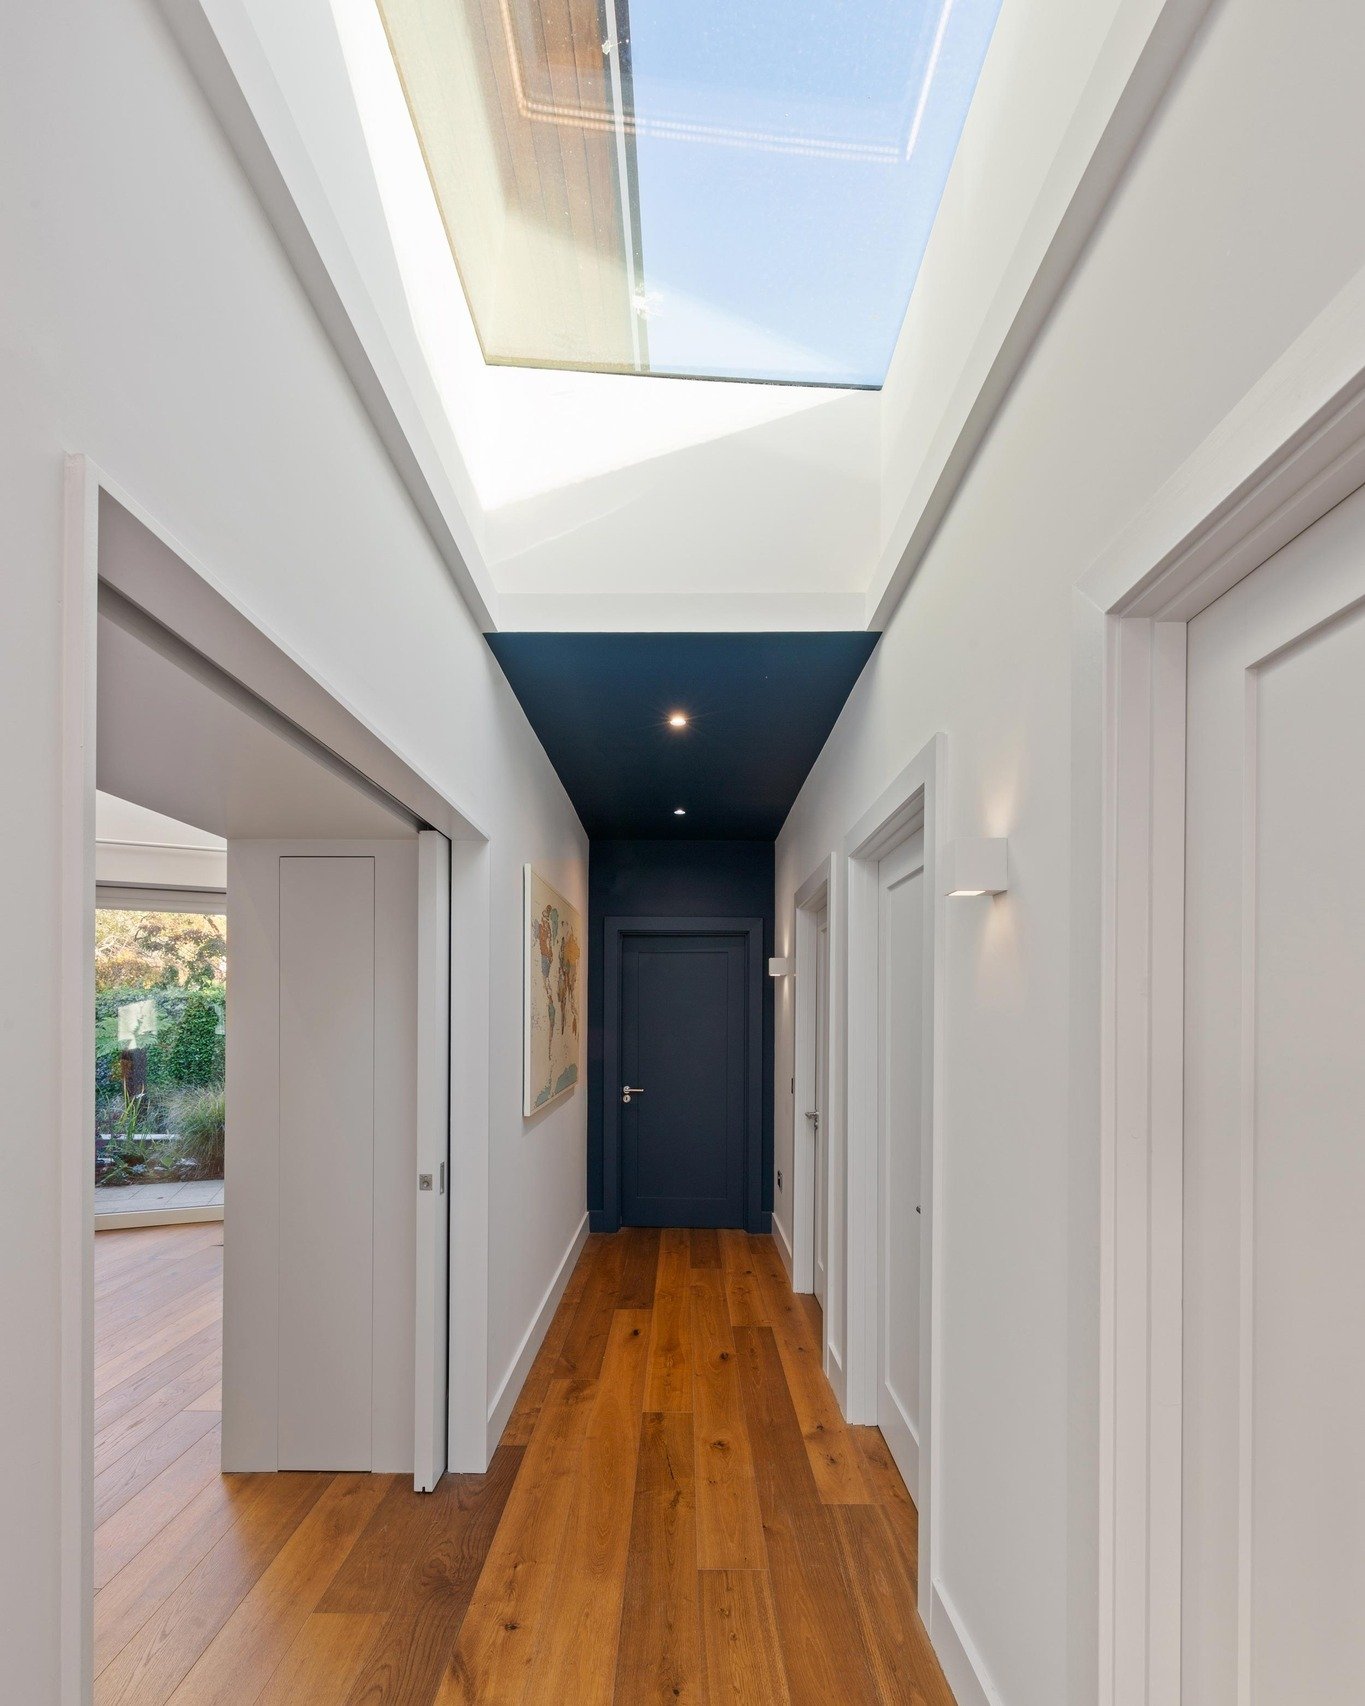 This week we are sharing the interior of a previous client project of ours 🏡

Take a look at these hallway pictures &ndash; both angles highlight the huge skylight, flooding the space with sunlight, creating a bright and airy atmosphere ☀️

What do 